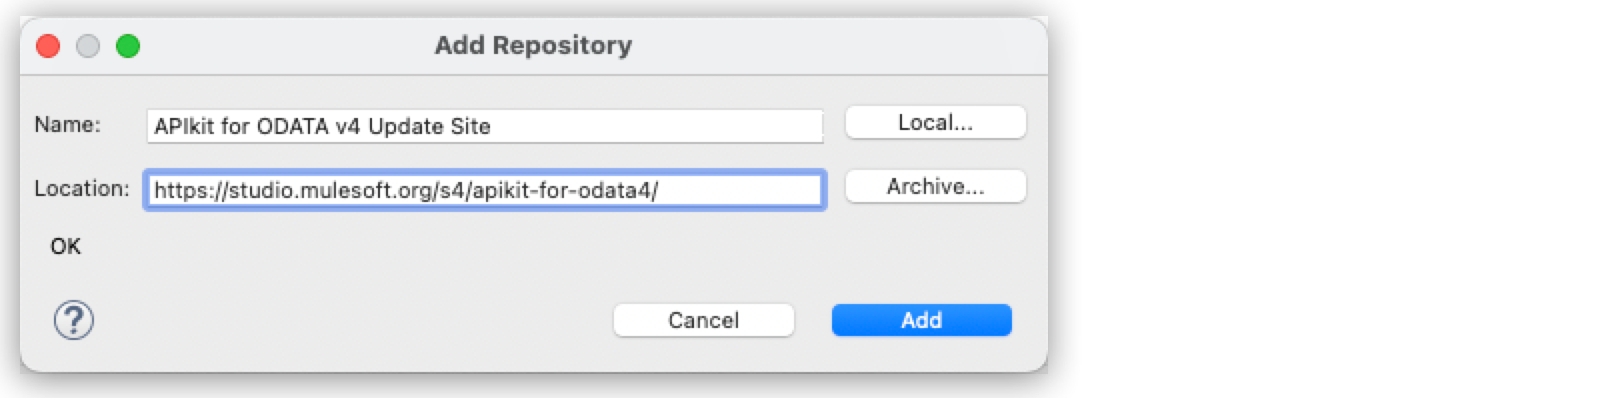 Window for adding a repository highlighting the *Add* button, with the name and location fields